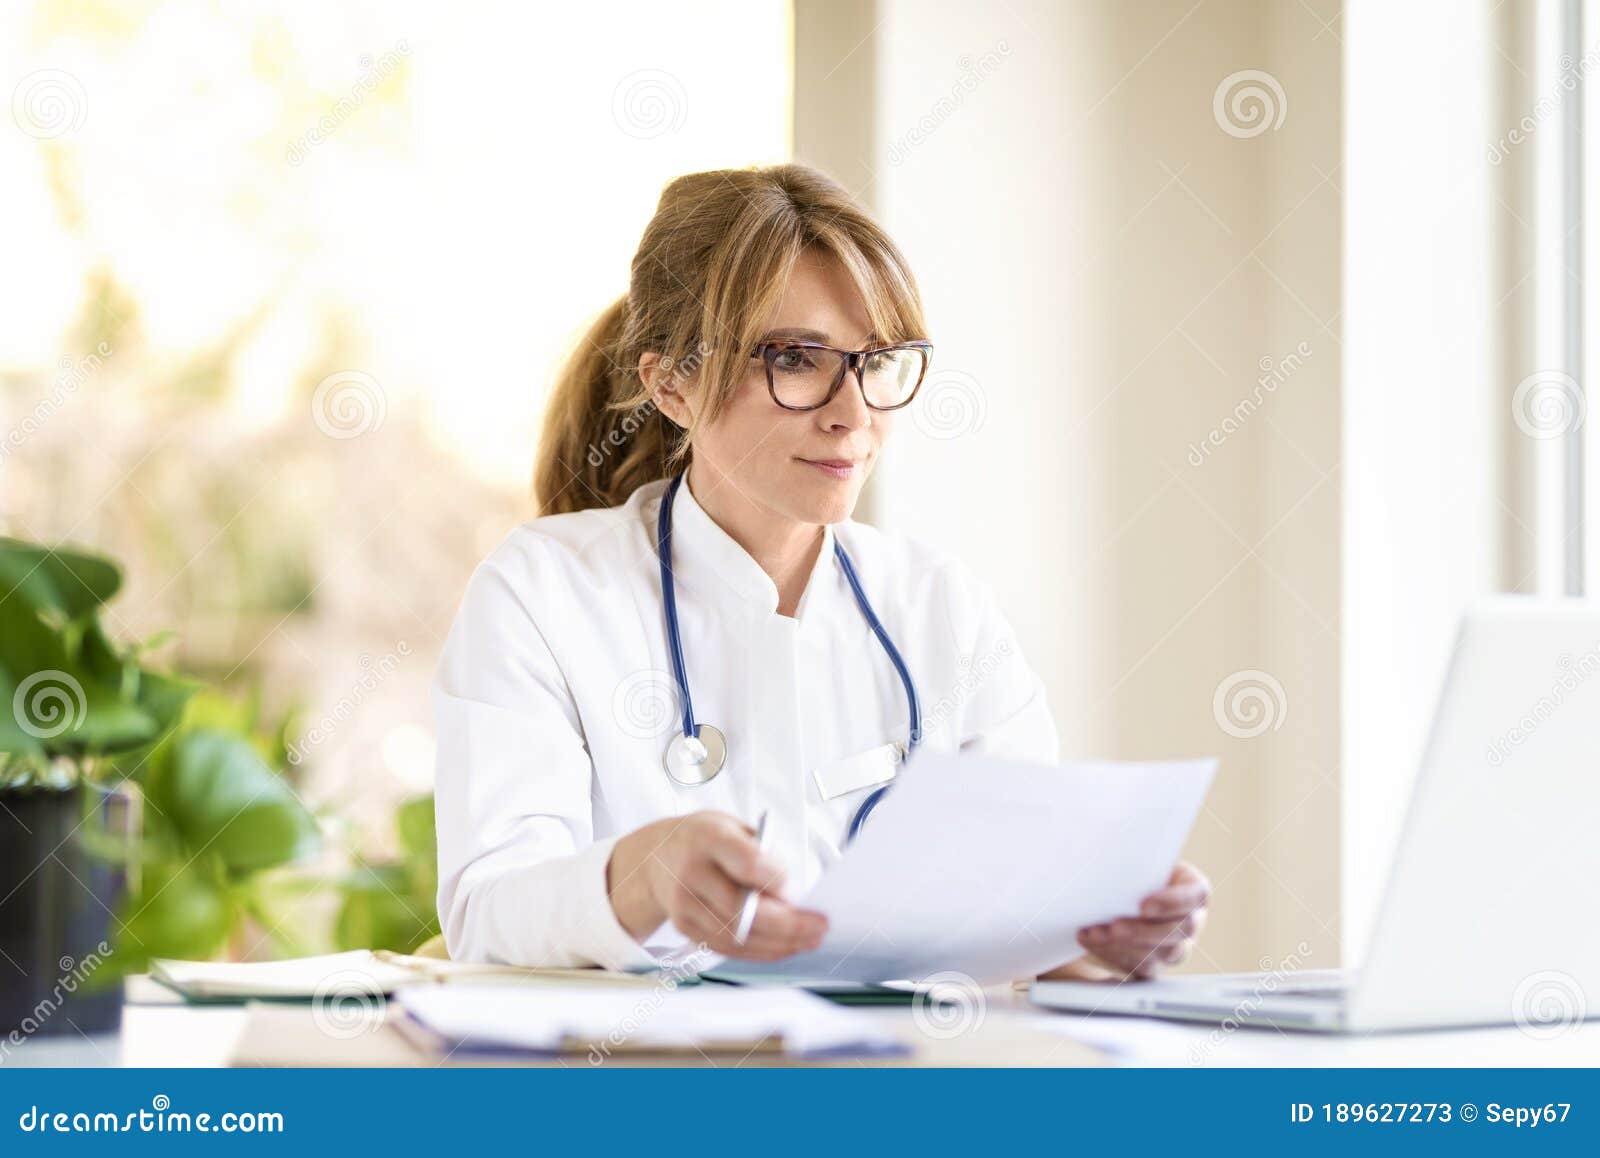 smiling female doctor sitting at desk and working on laptop